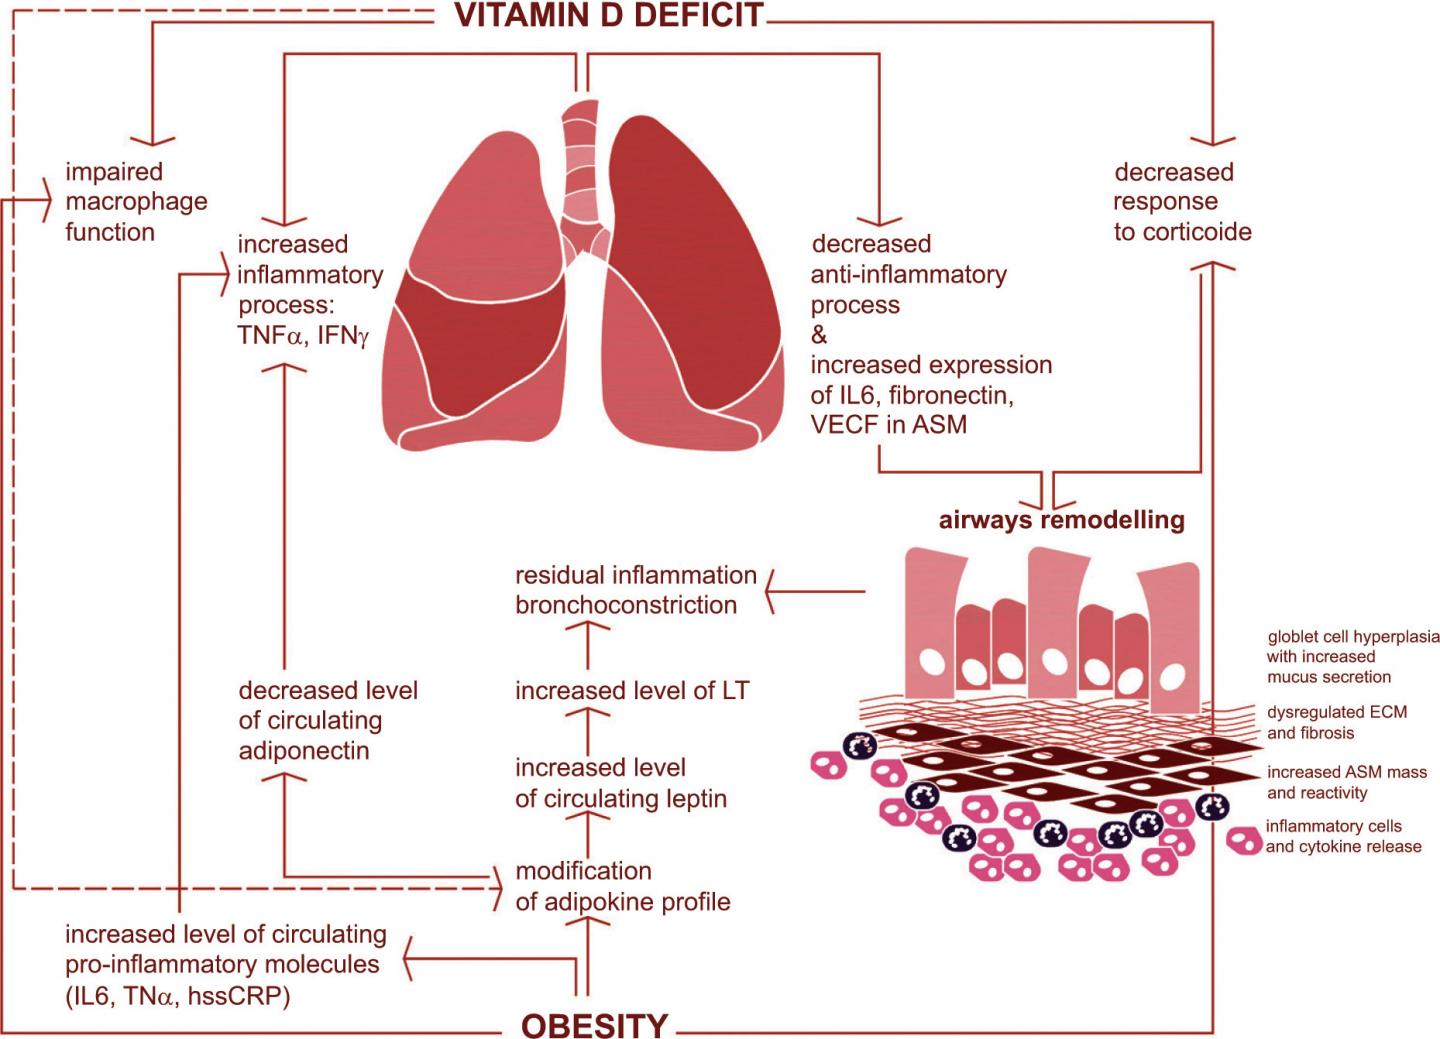 Vitamin D Intake and Obesity in Occupational Asthma Patients and the Need for Supplementation